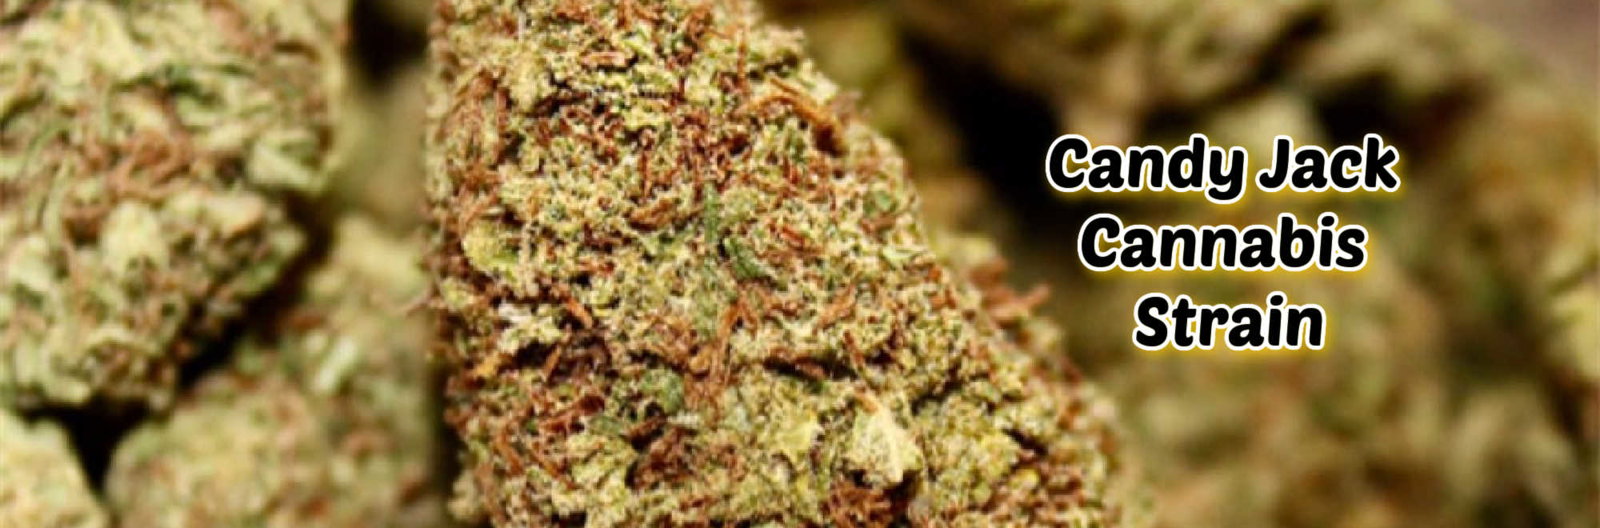 image of candy jack cannabis strain review